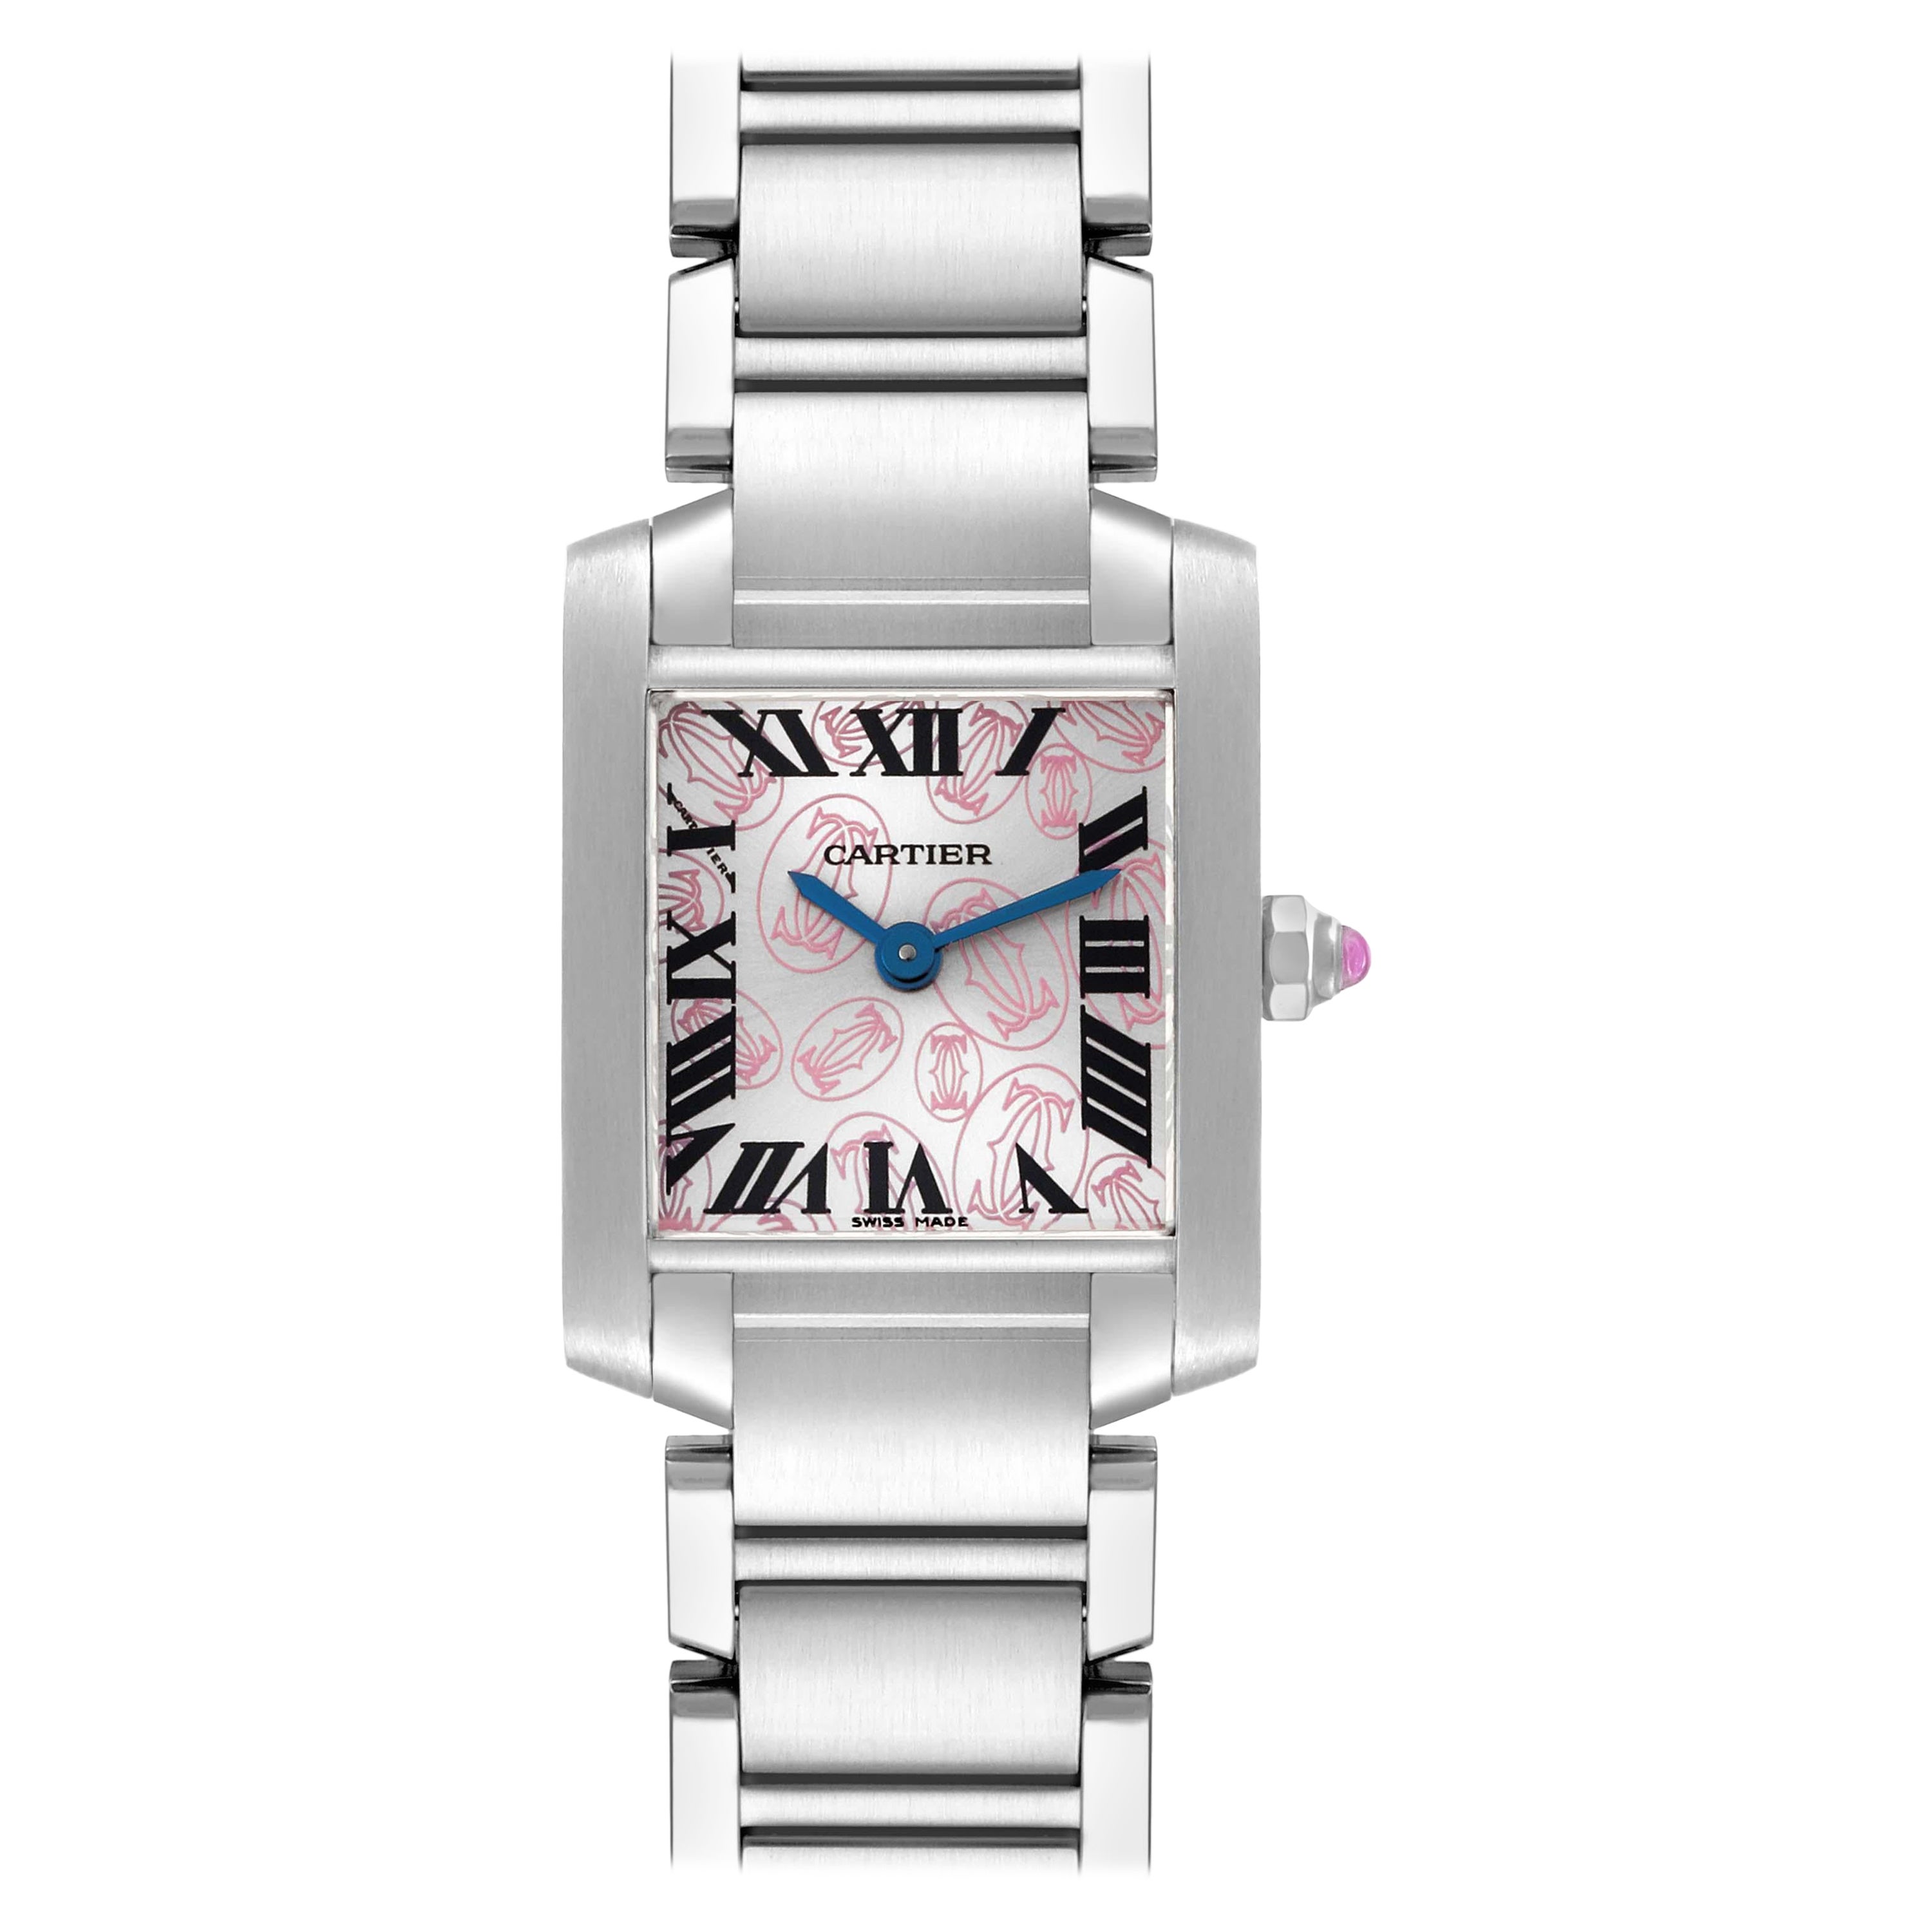 Cartier Tank Francaise Pink Double C Decor Limited Edition Steel Watch W51031Q3 For Sale